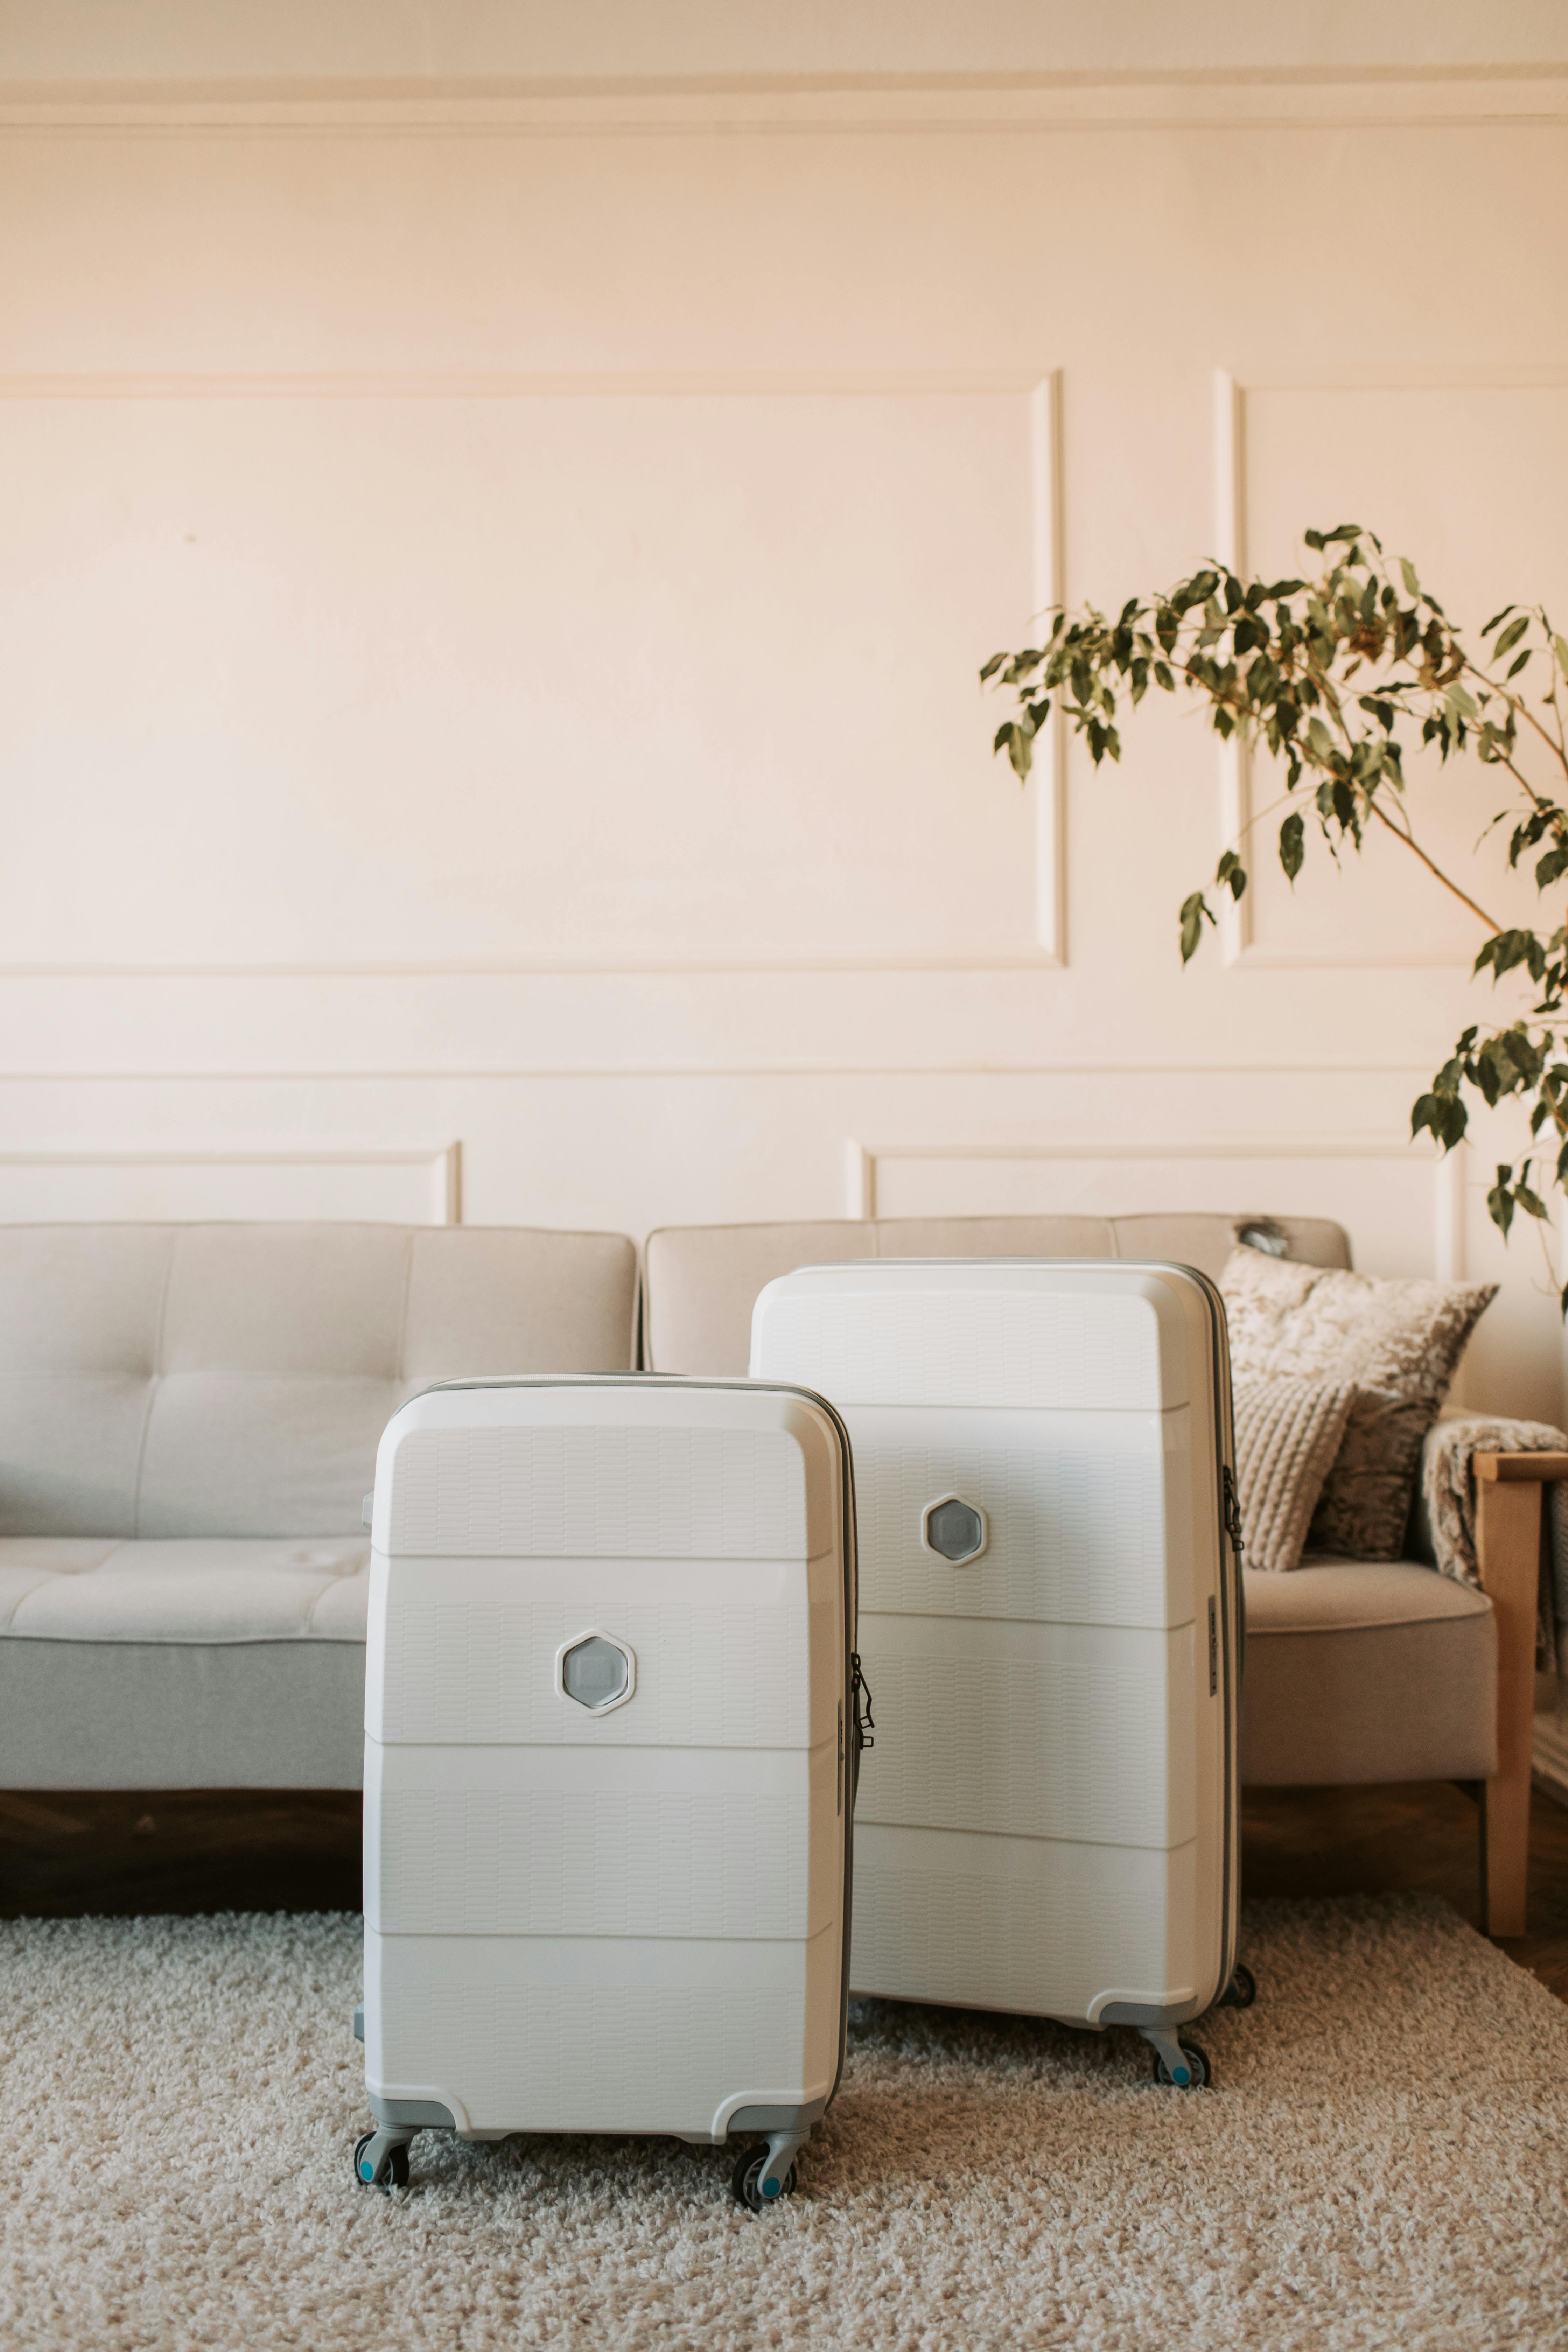 Two suitcases beside a plant | Source: Pexels